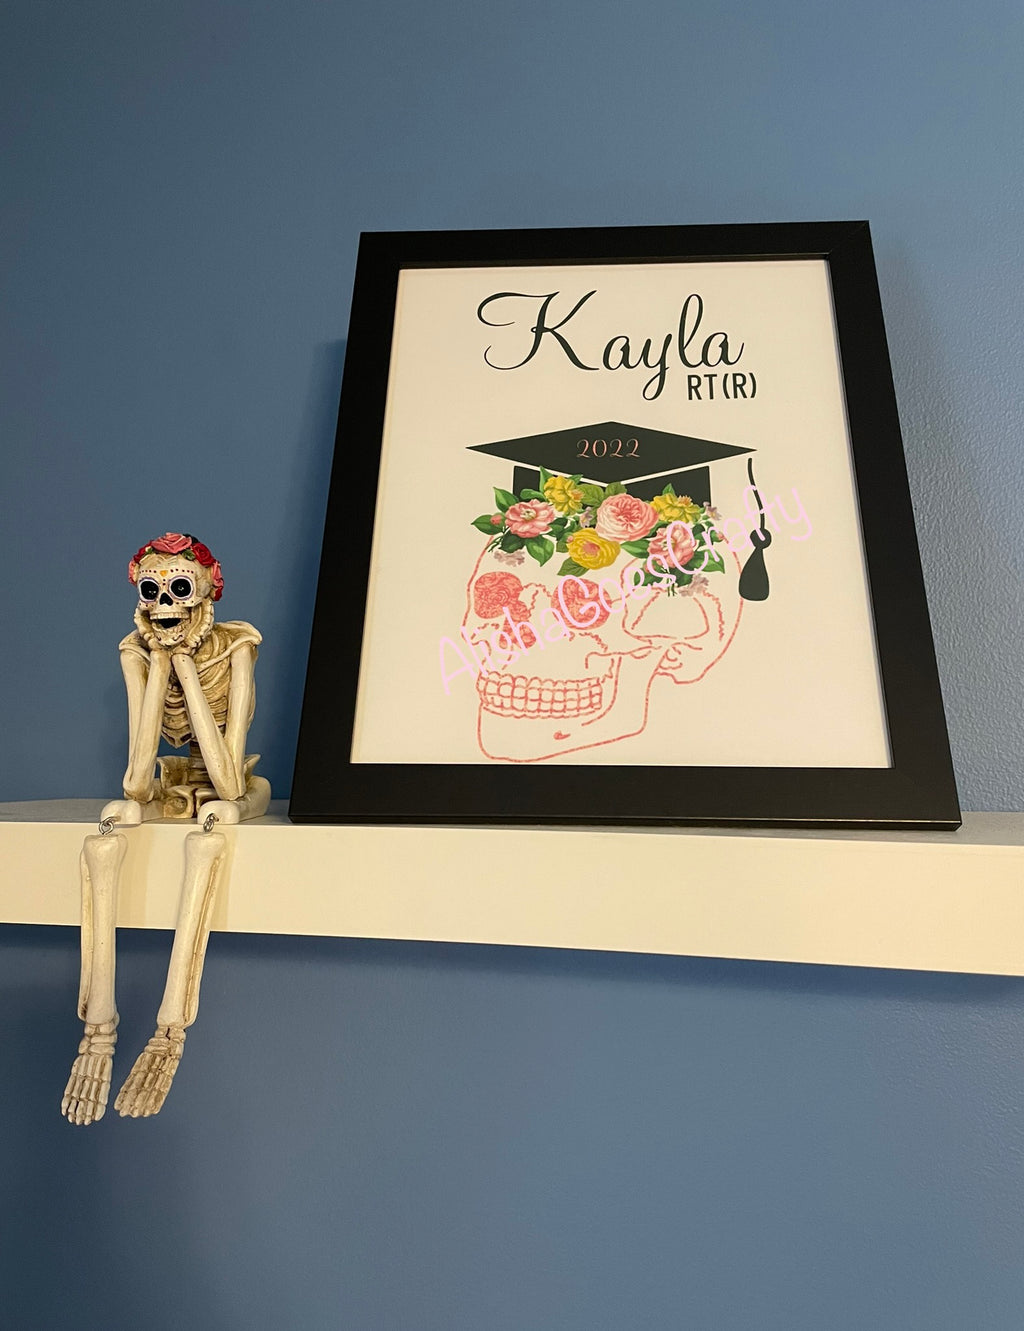 Radiography Graduation Gift, Personalized, Picture Frame, Skull with Graduation Cap, Xray Tech, Radiology, RT (R), Rad Tech, Year